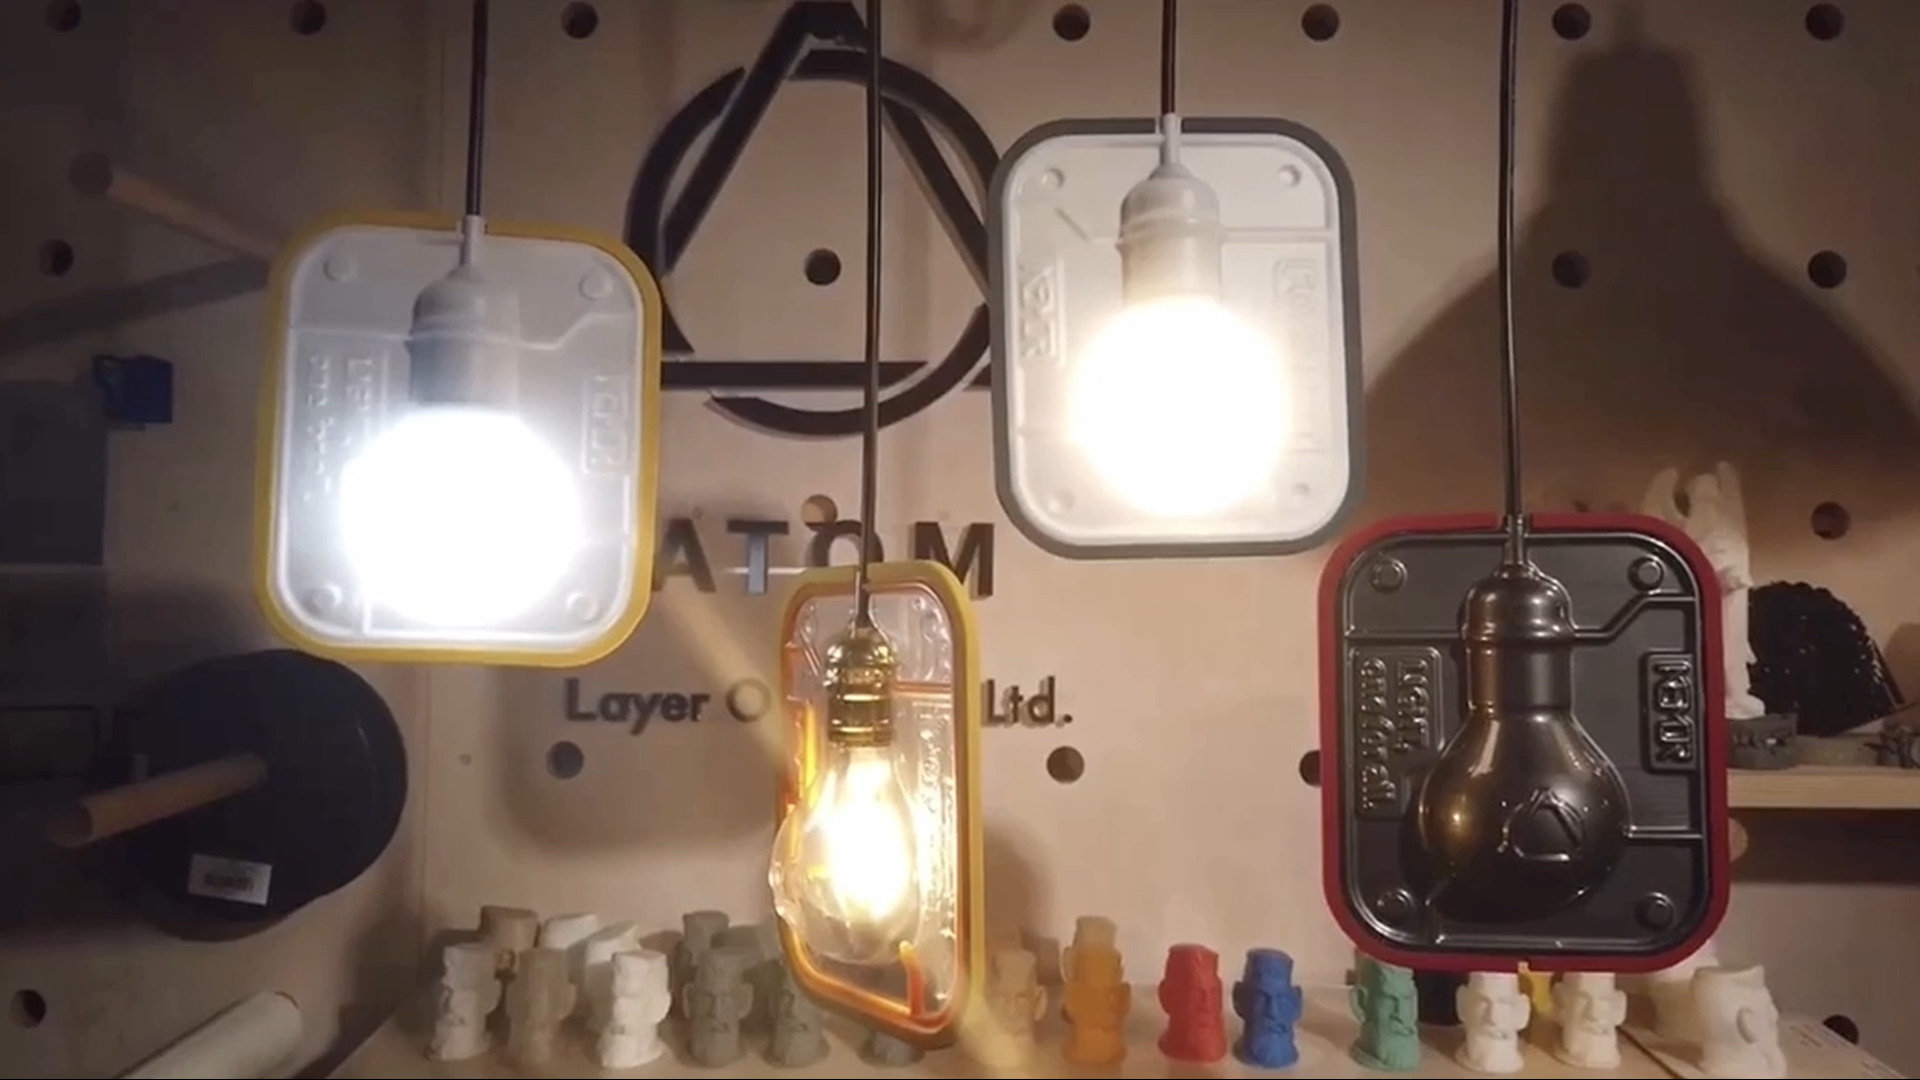 How to make a LED lamp with a 3D printed frame using a vacuum former